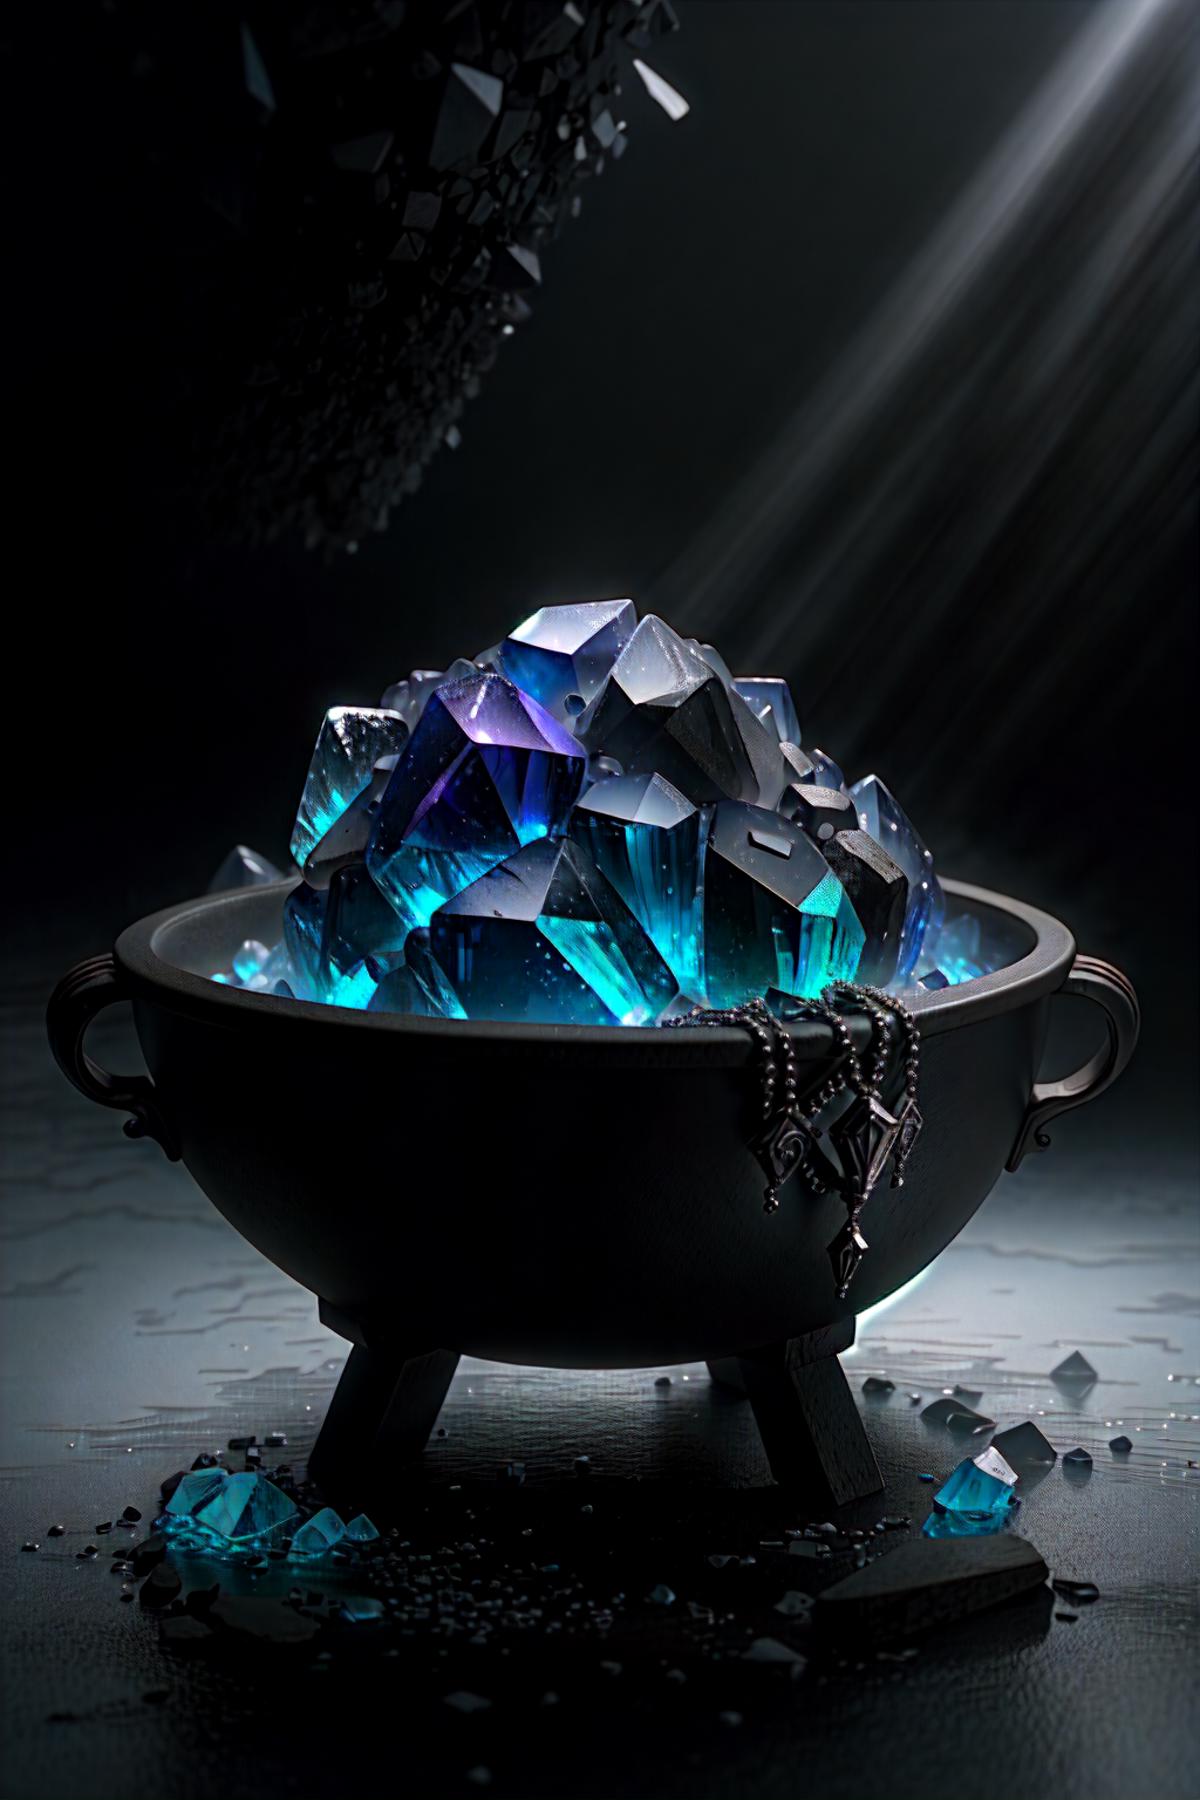 Crystal Cauldron image by woobly